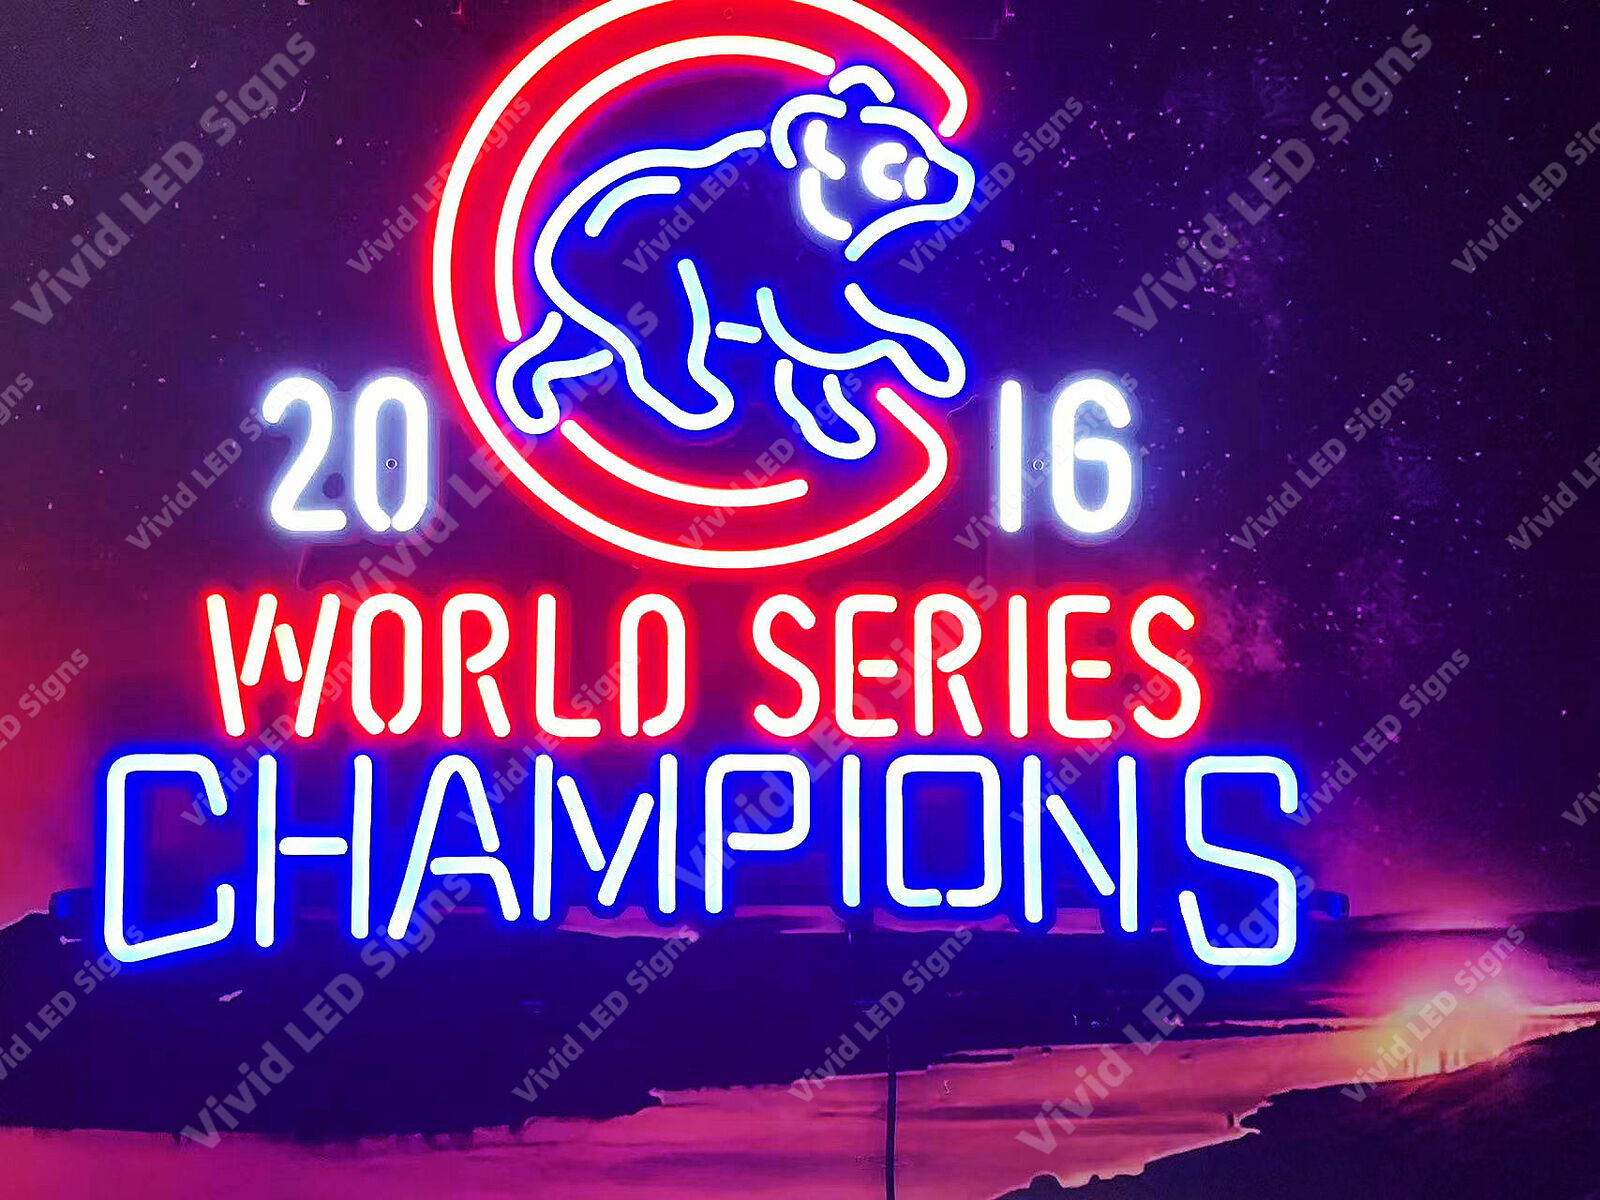 Chicago Cubs 2016 World Series Champs Vivid LED Neon Sign Light Lamp With Dimmer